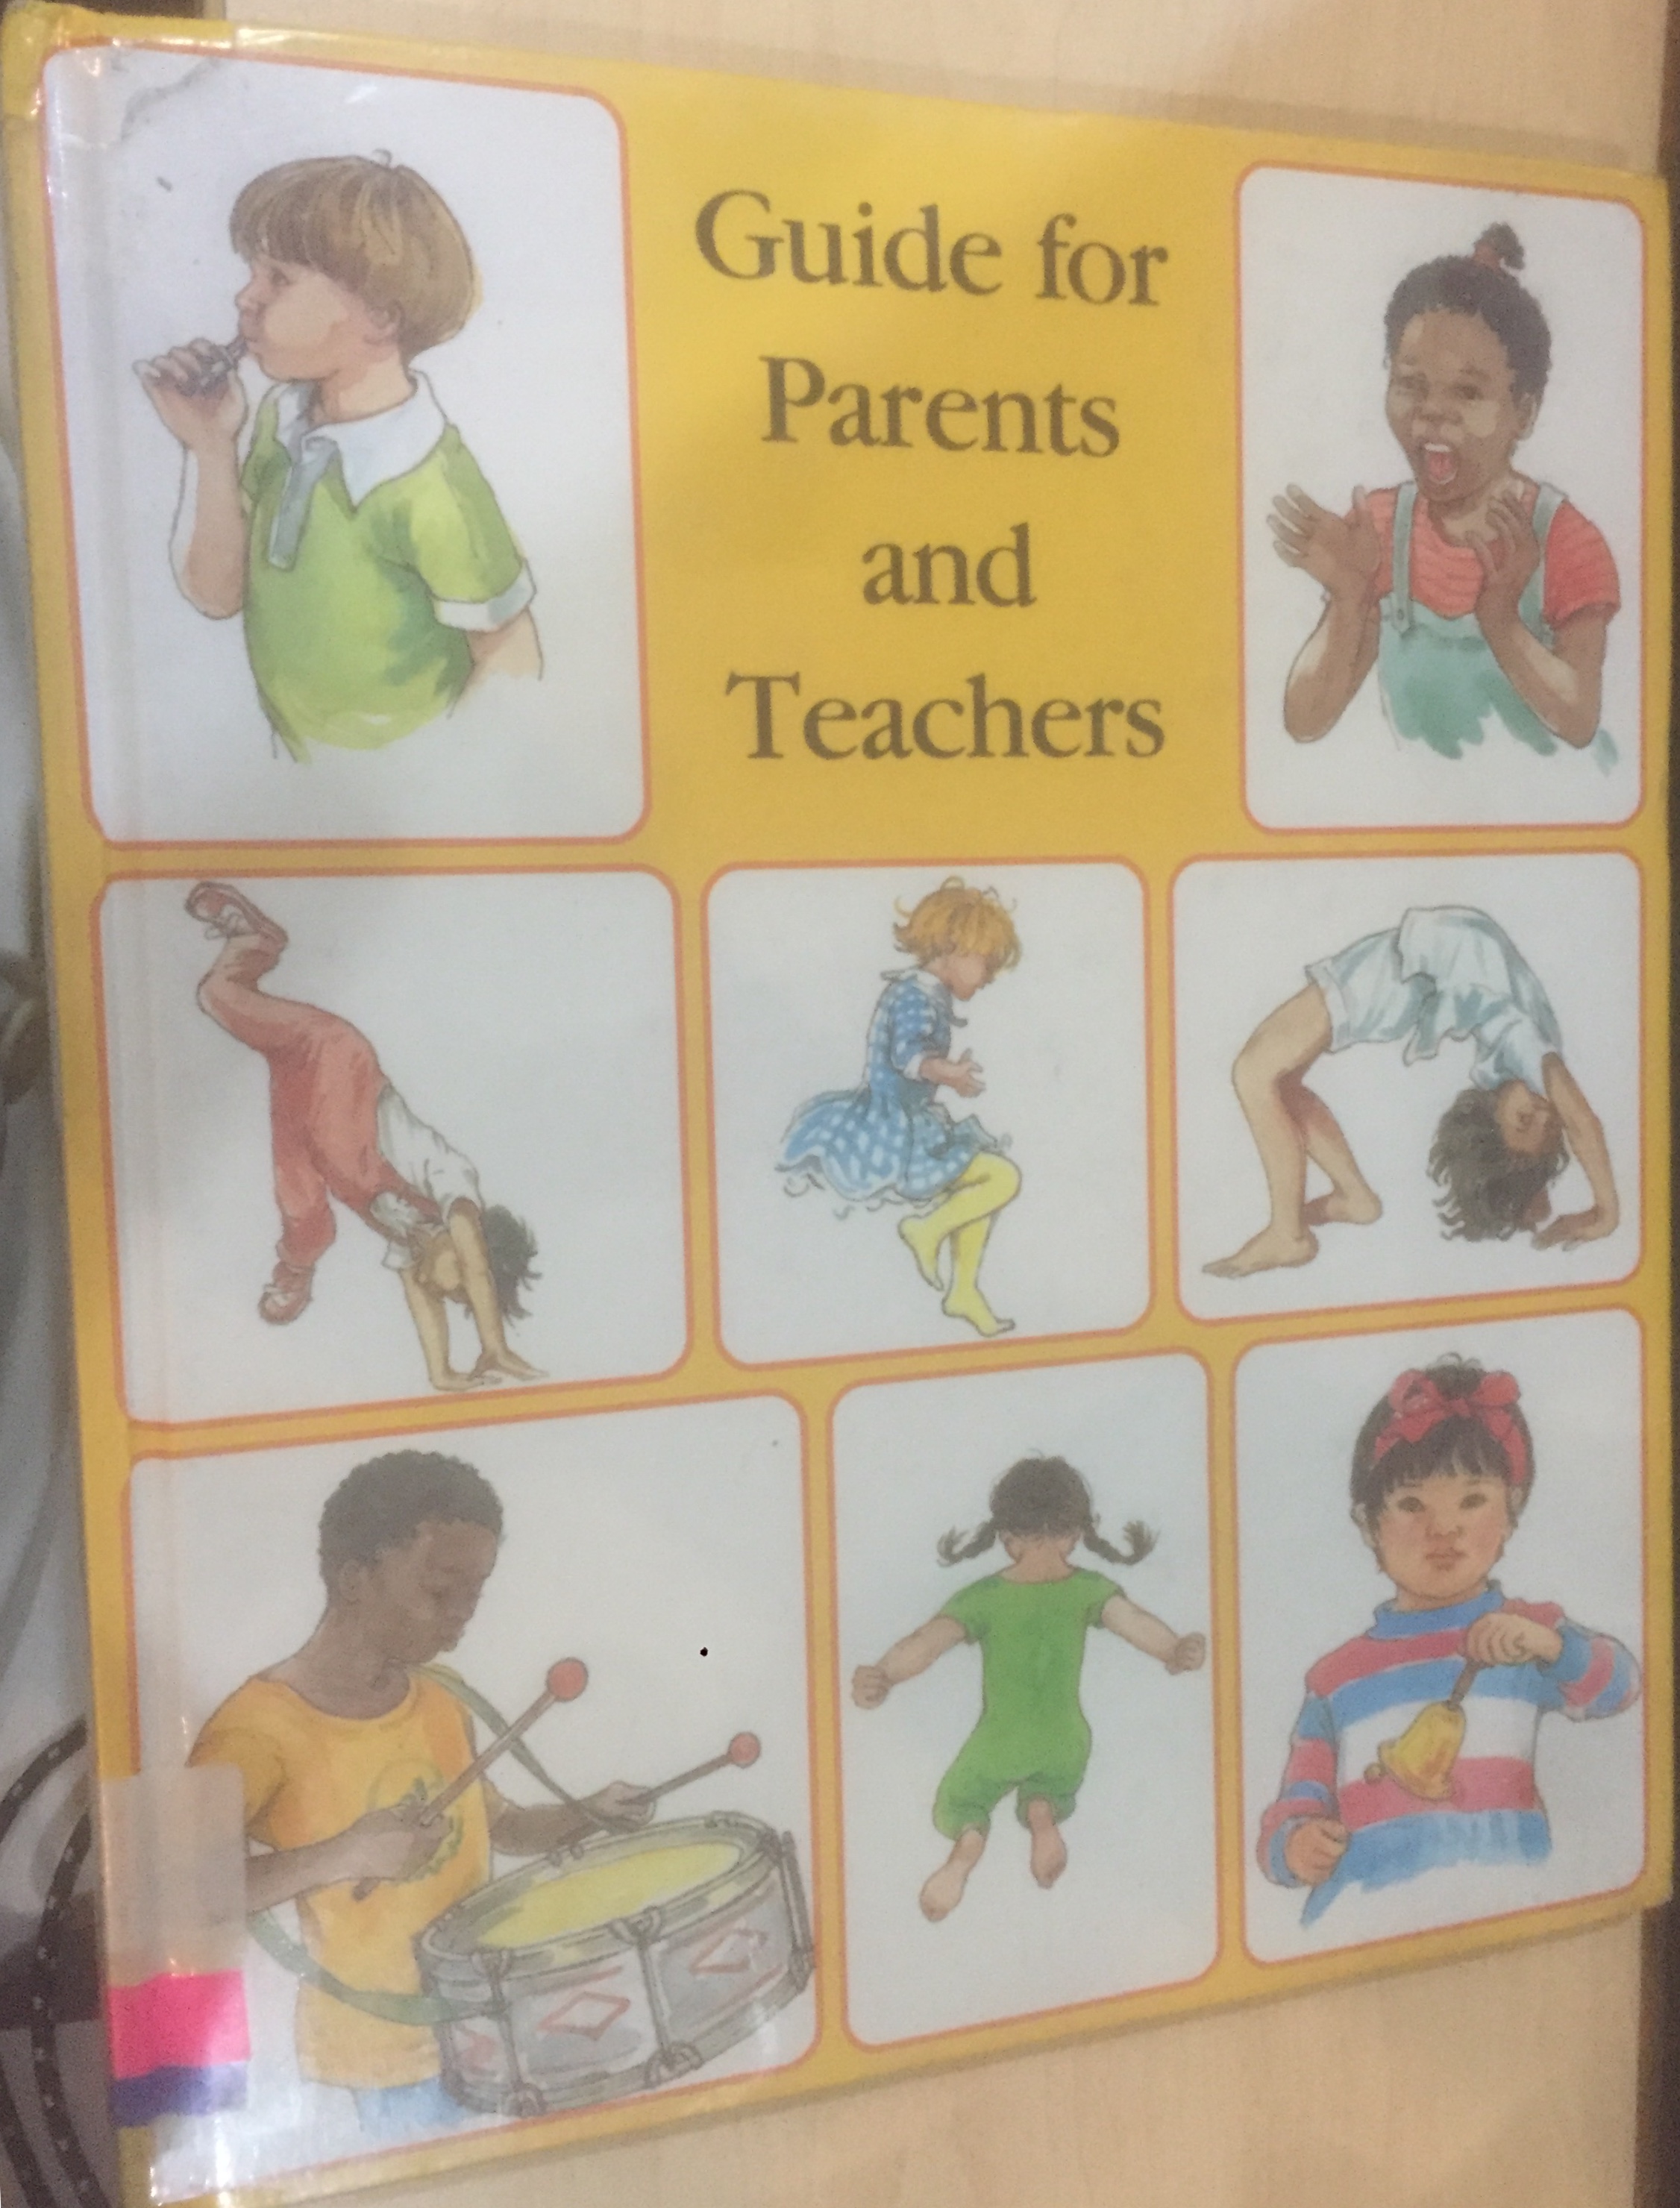 Guide for Parents and Teachers